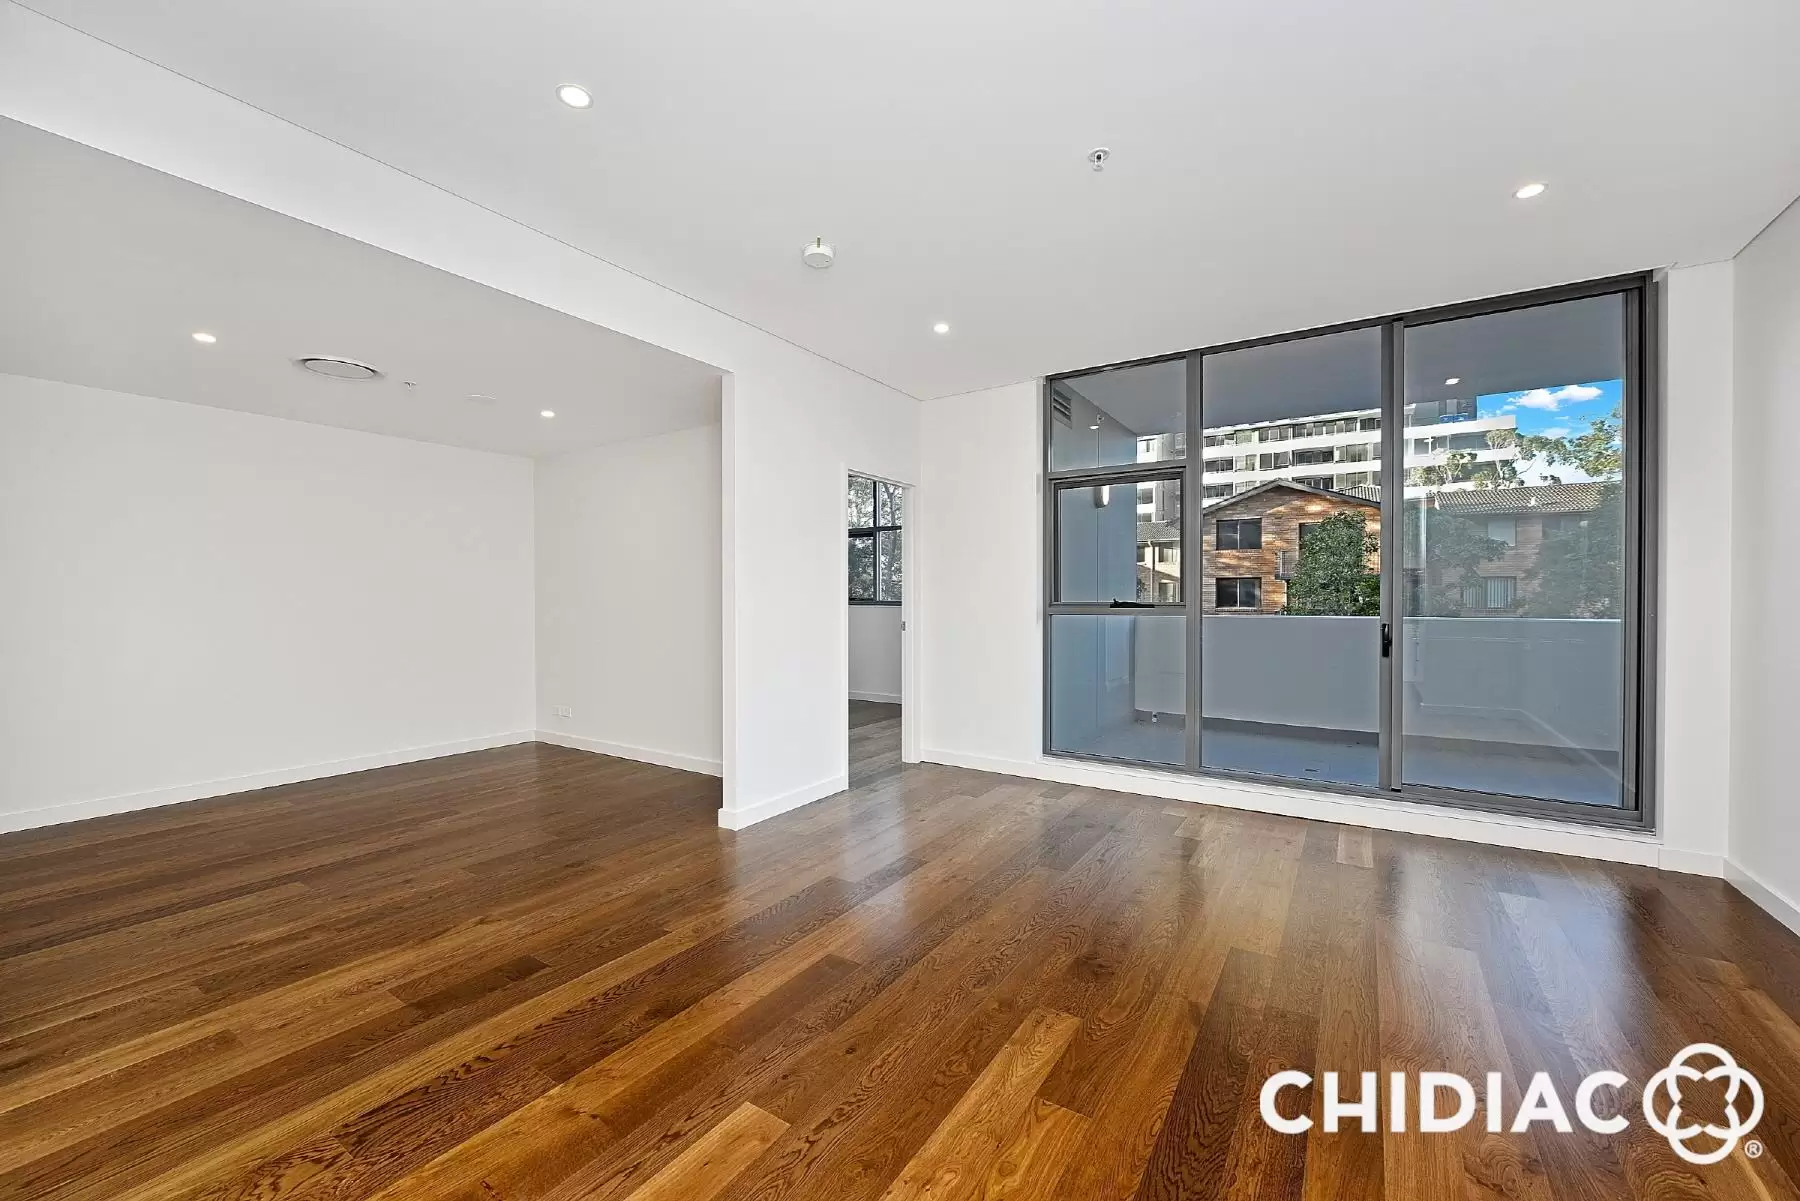 208/1 Mooltan Avenue, Macquarie Park Leased by Chidiac Realty - image 1